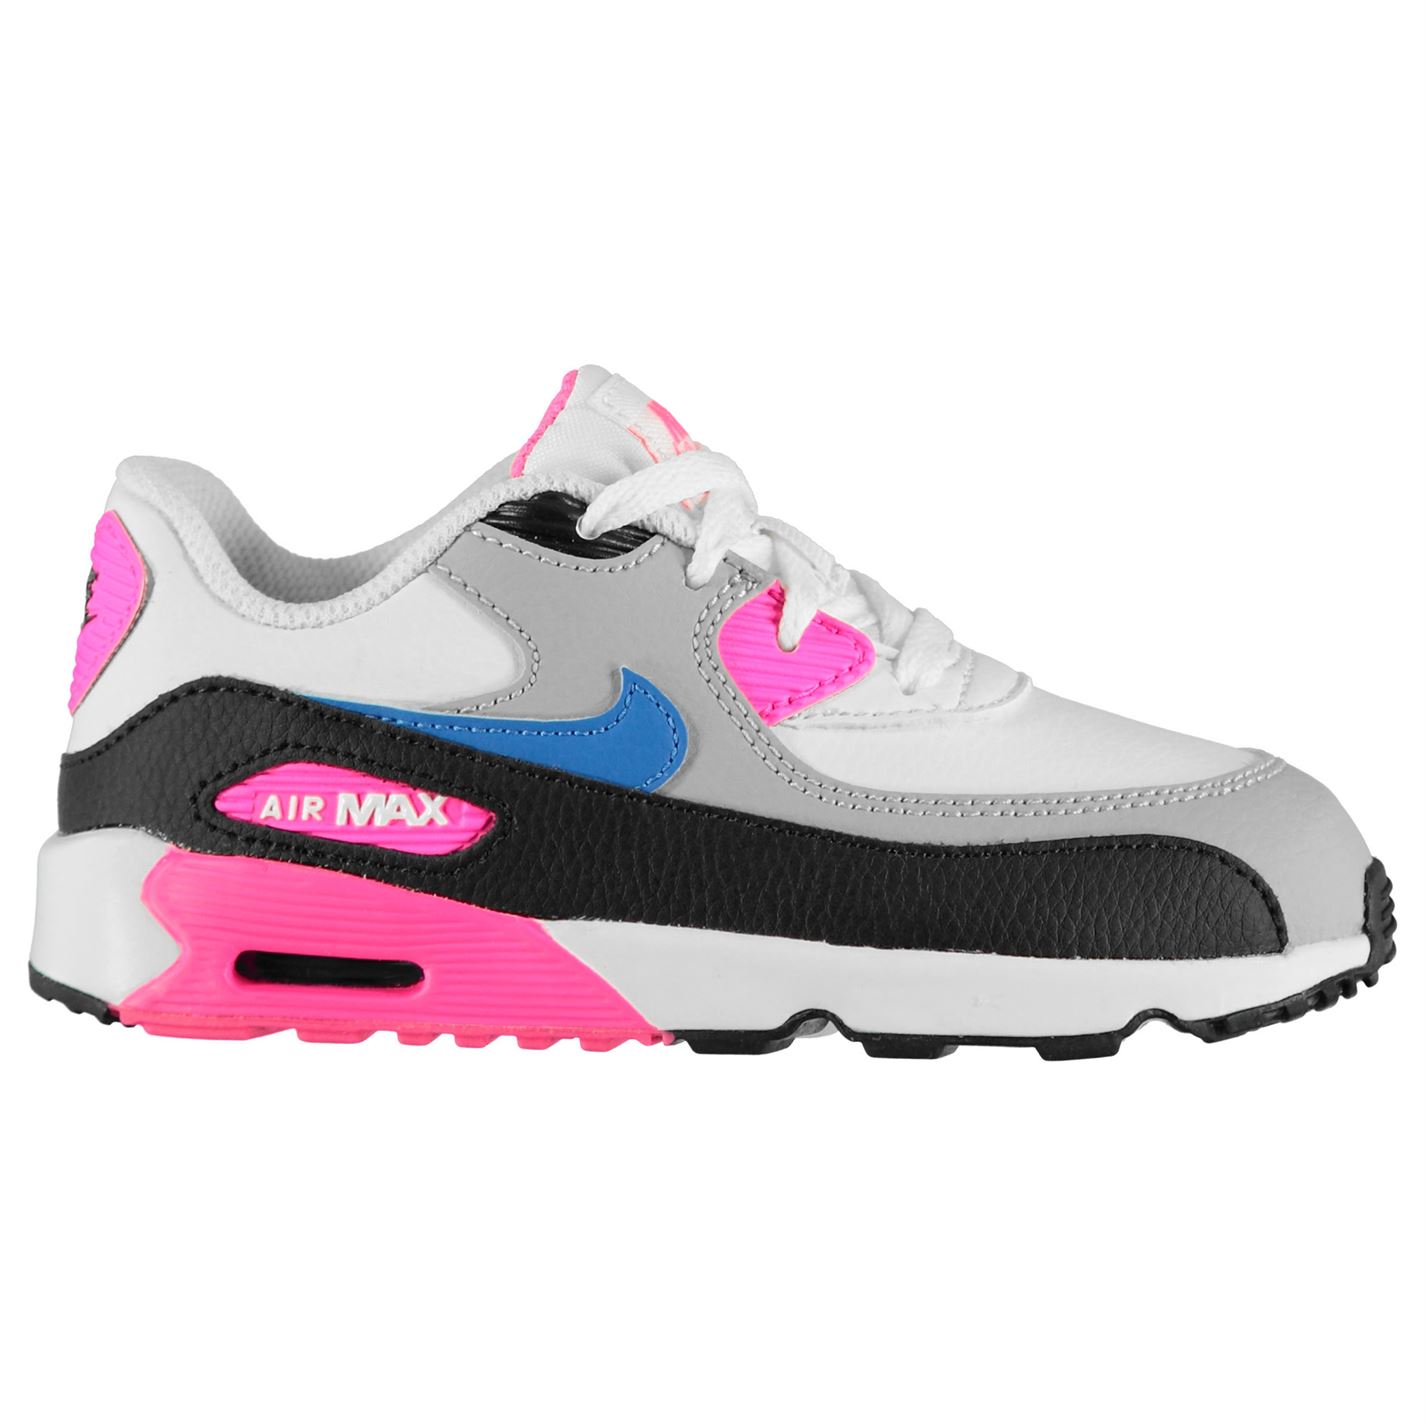 Nike Air Max 90 Trainers Infant Girls